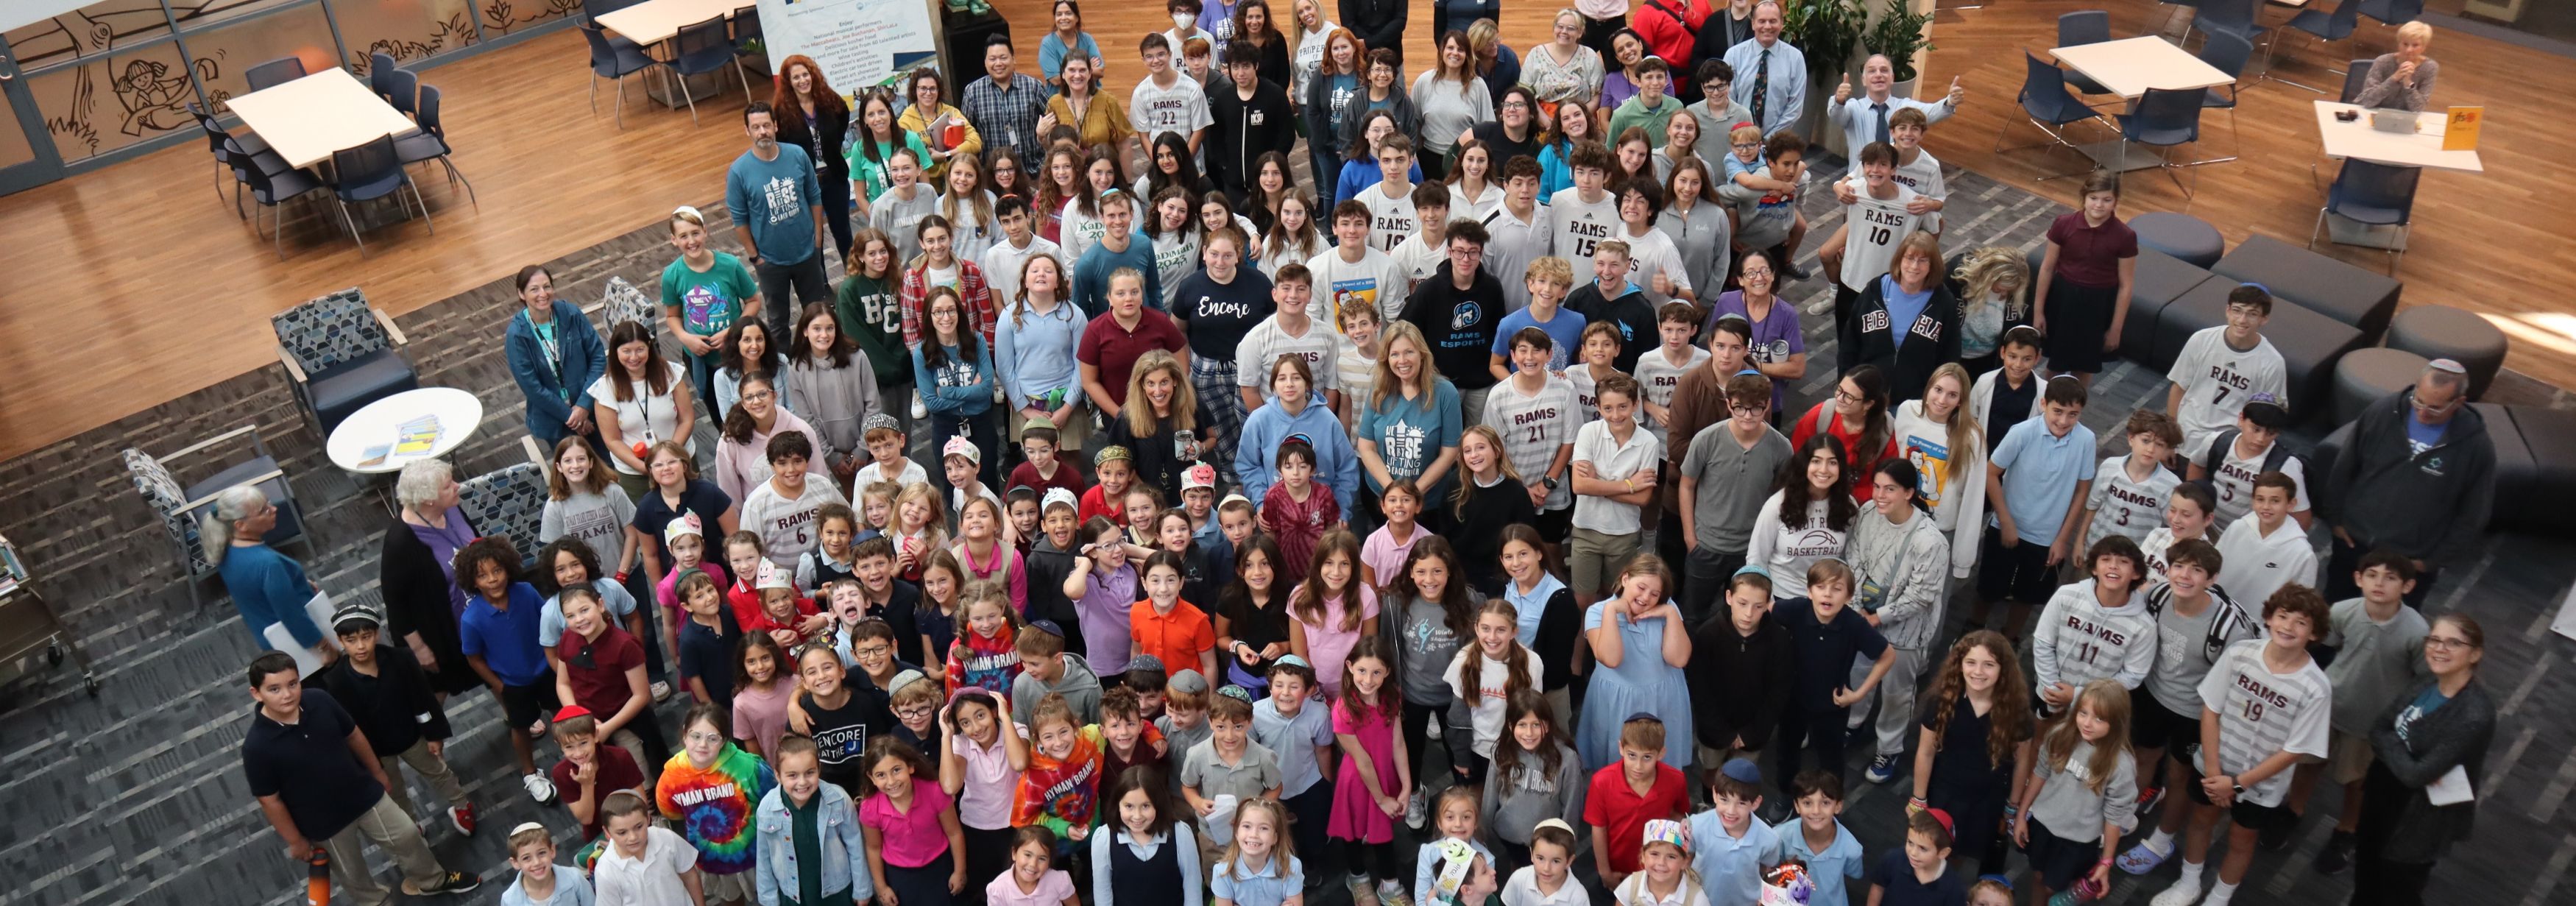 All HBHA students and staff smile together for a whole-school photo